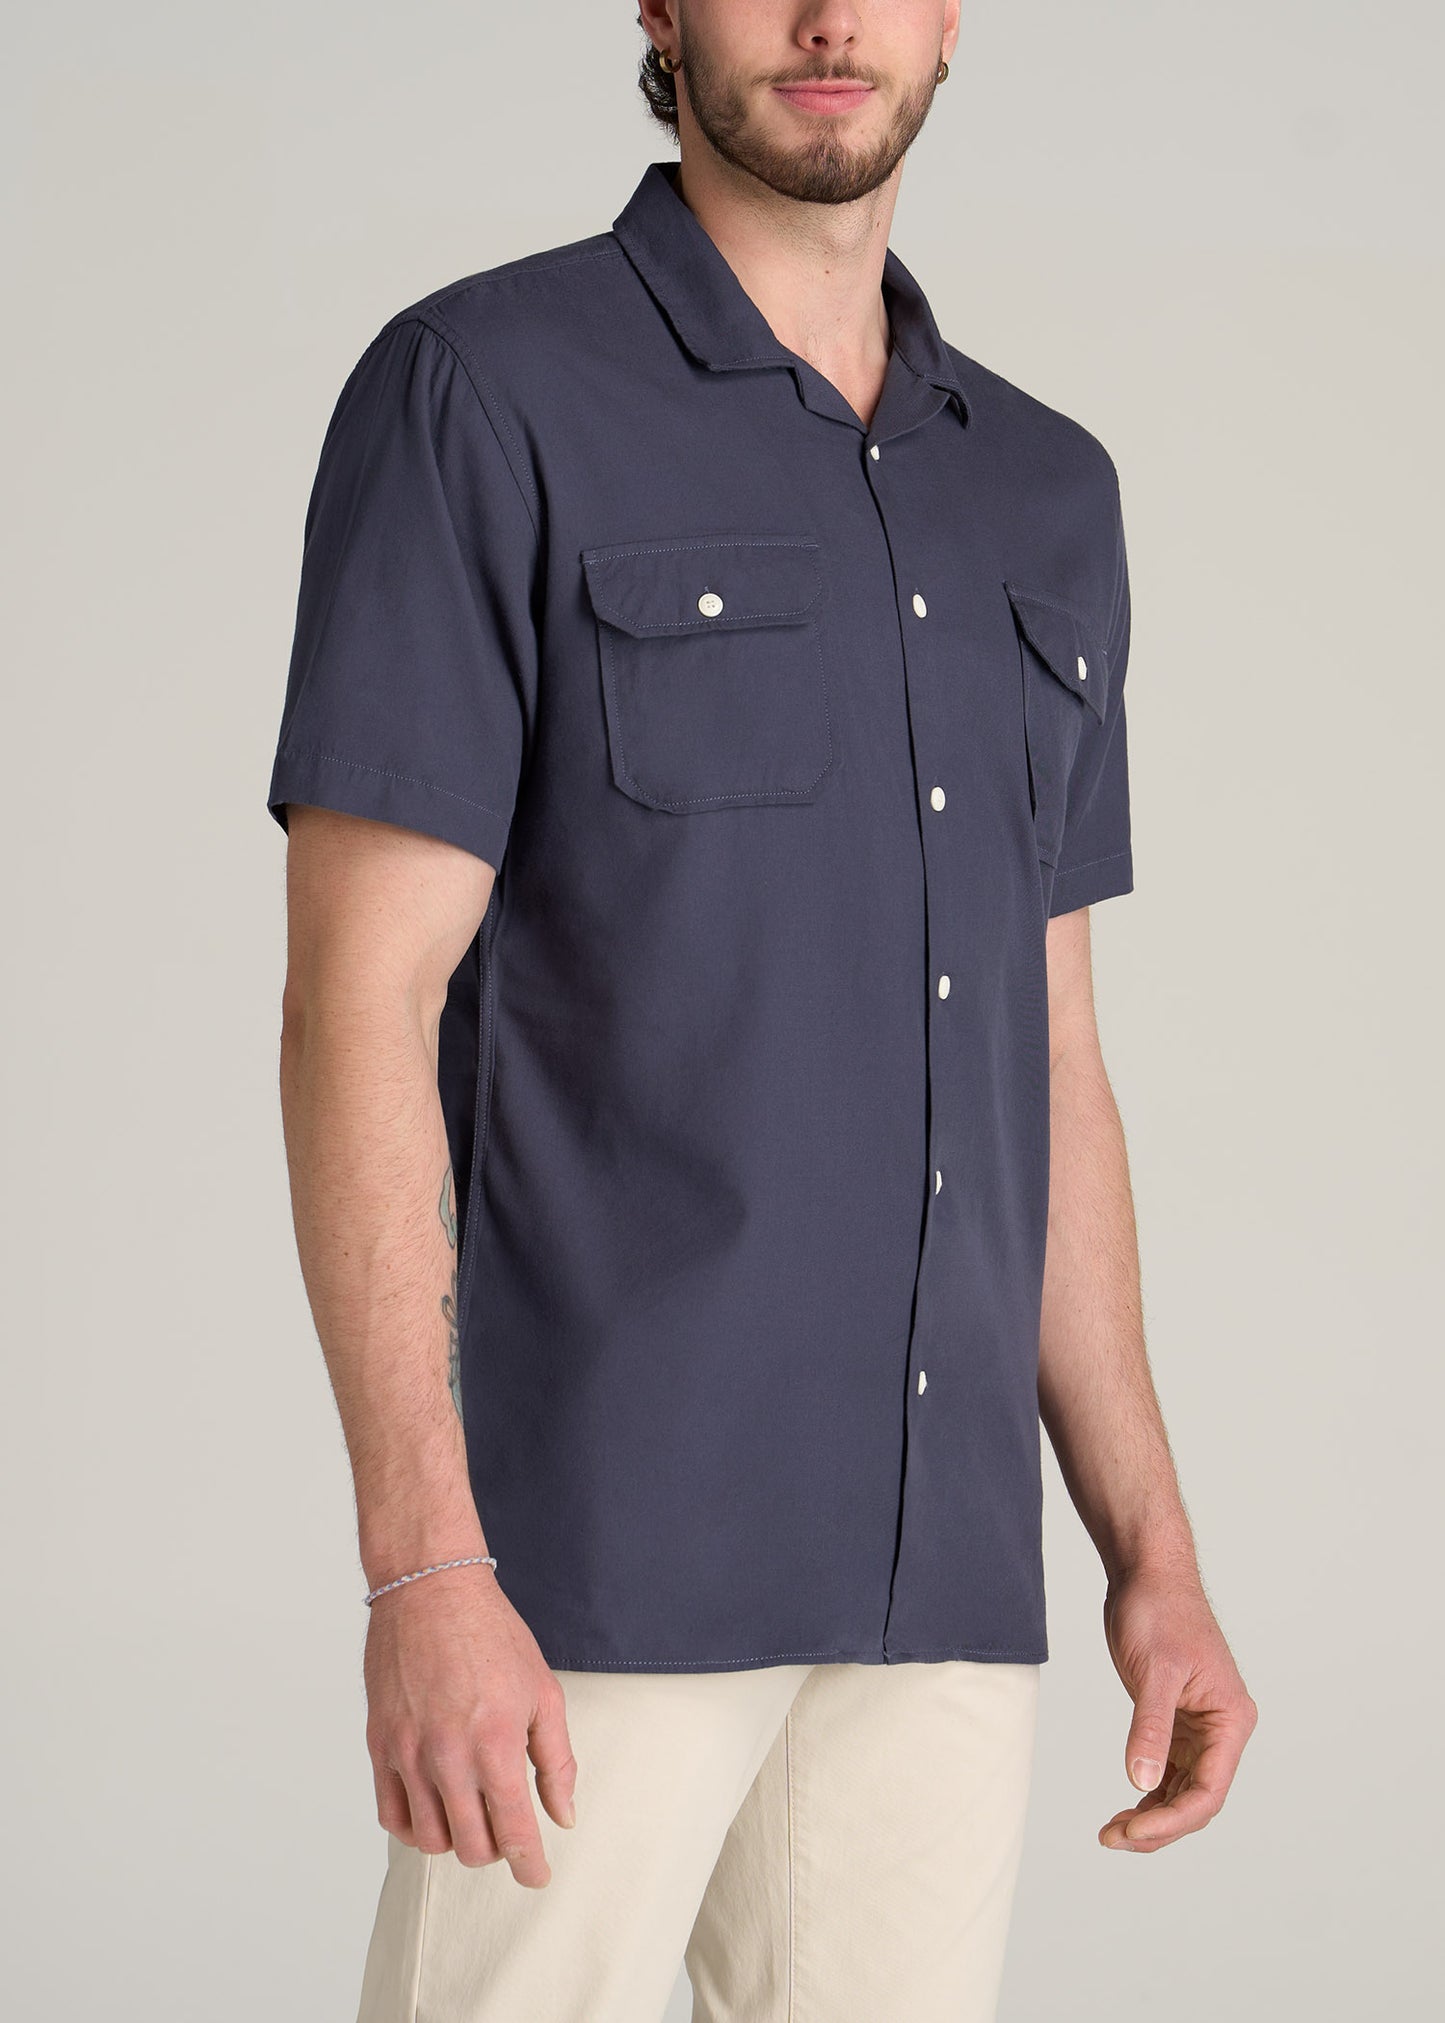 American-Tall-Men-Two-Pocket-Camp-Shirt-Weathered-Navy-side